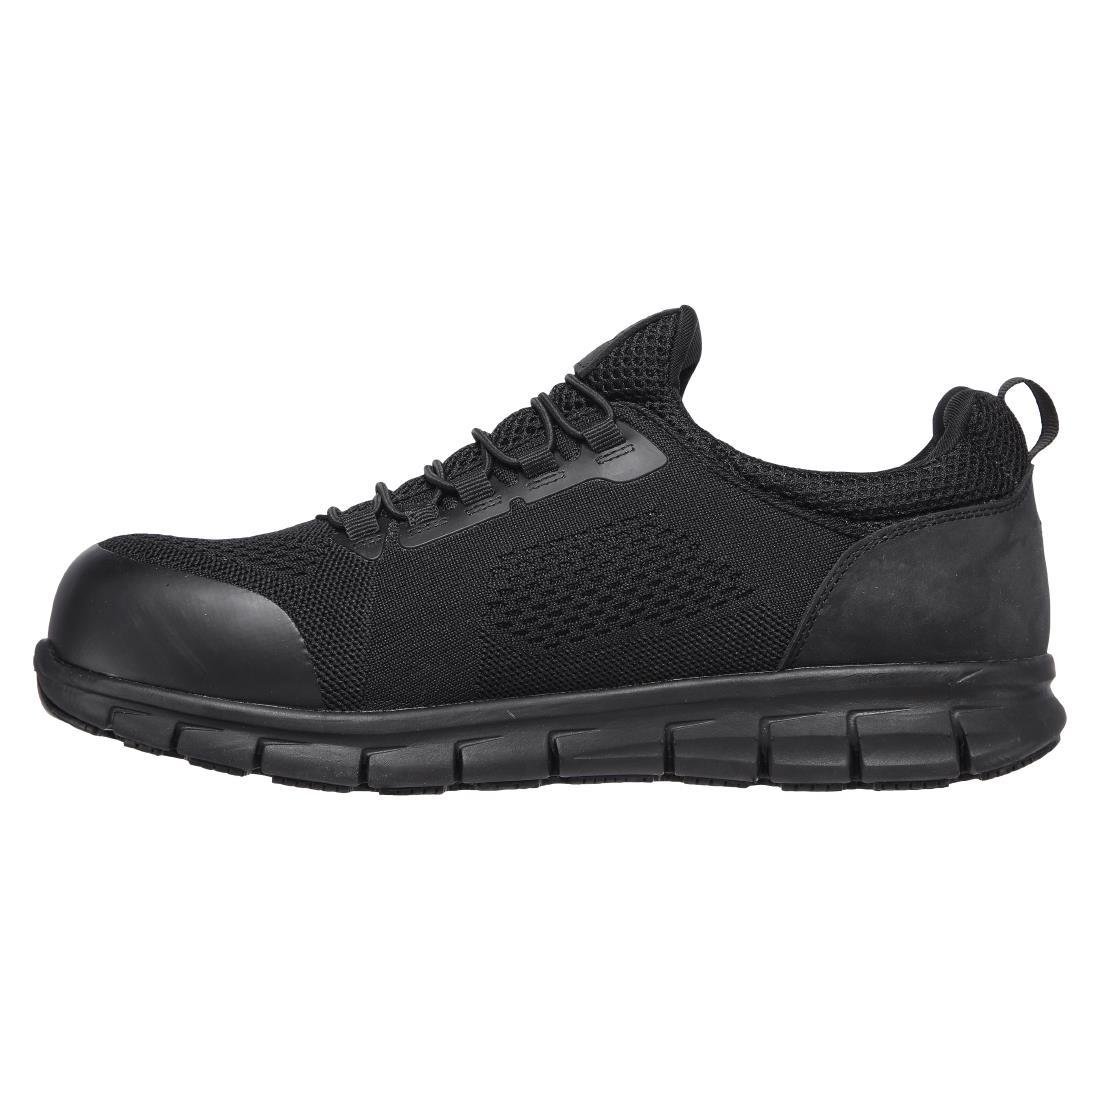 Skechers Safety Shoe with Steel Toe Cap Size 42 - BB675-42  - 2